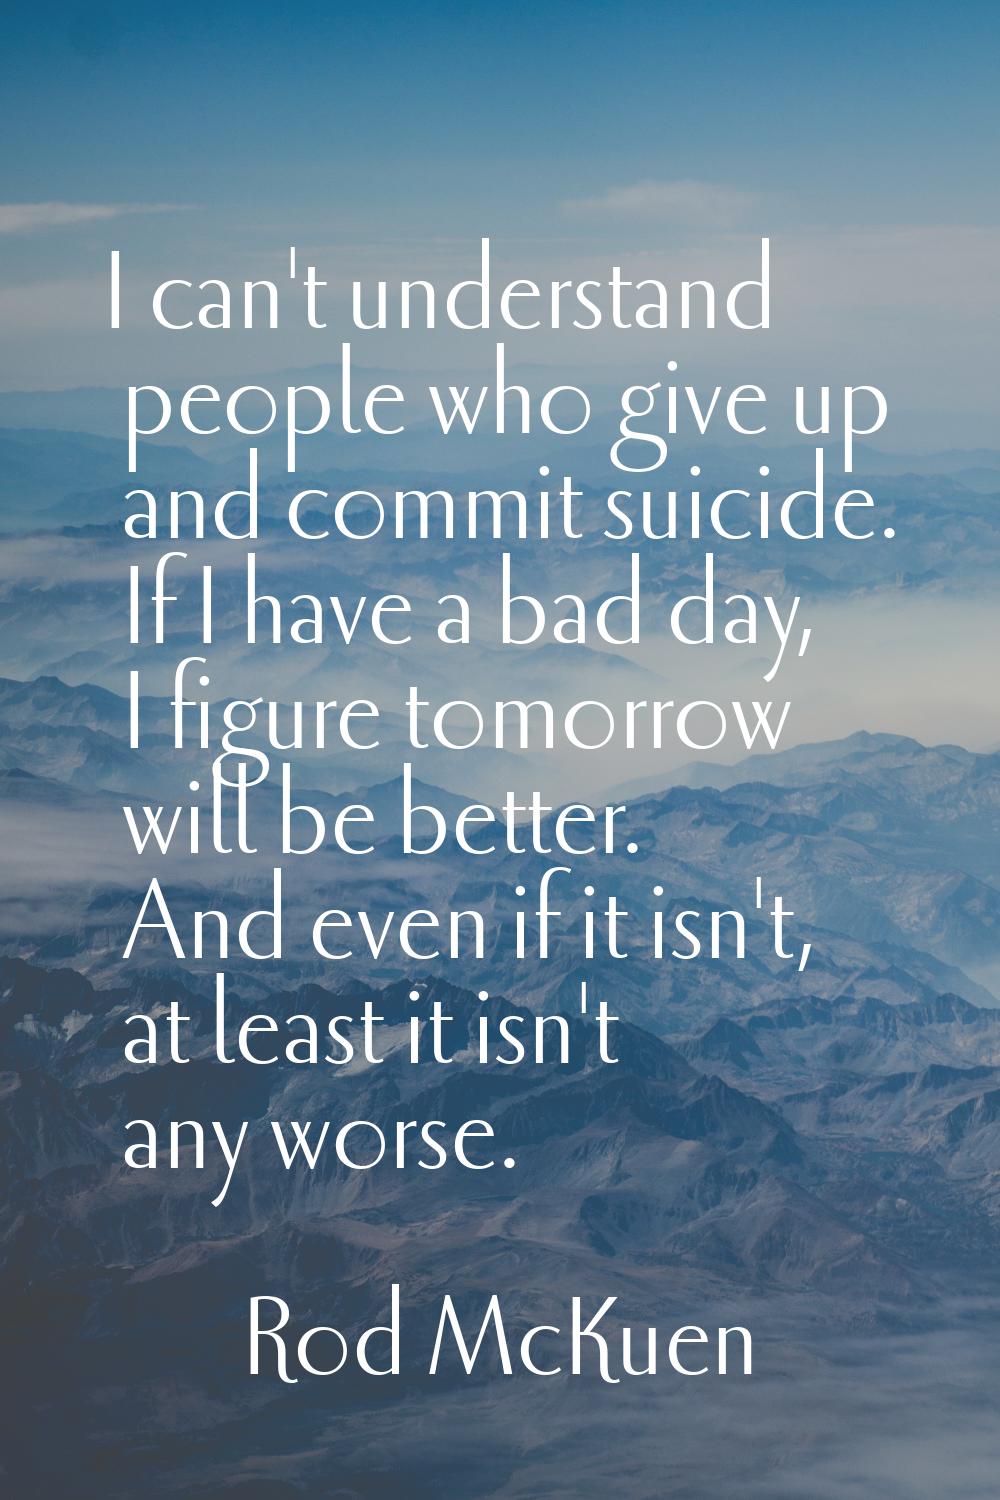 I can't understand people who give up and commit suicide. If I have a bad day, I figure tomorrow wi